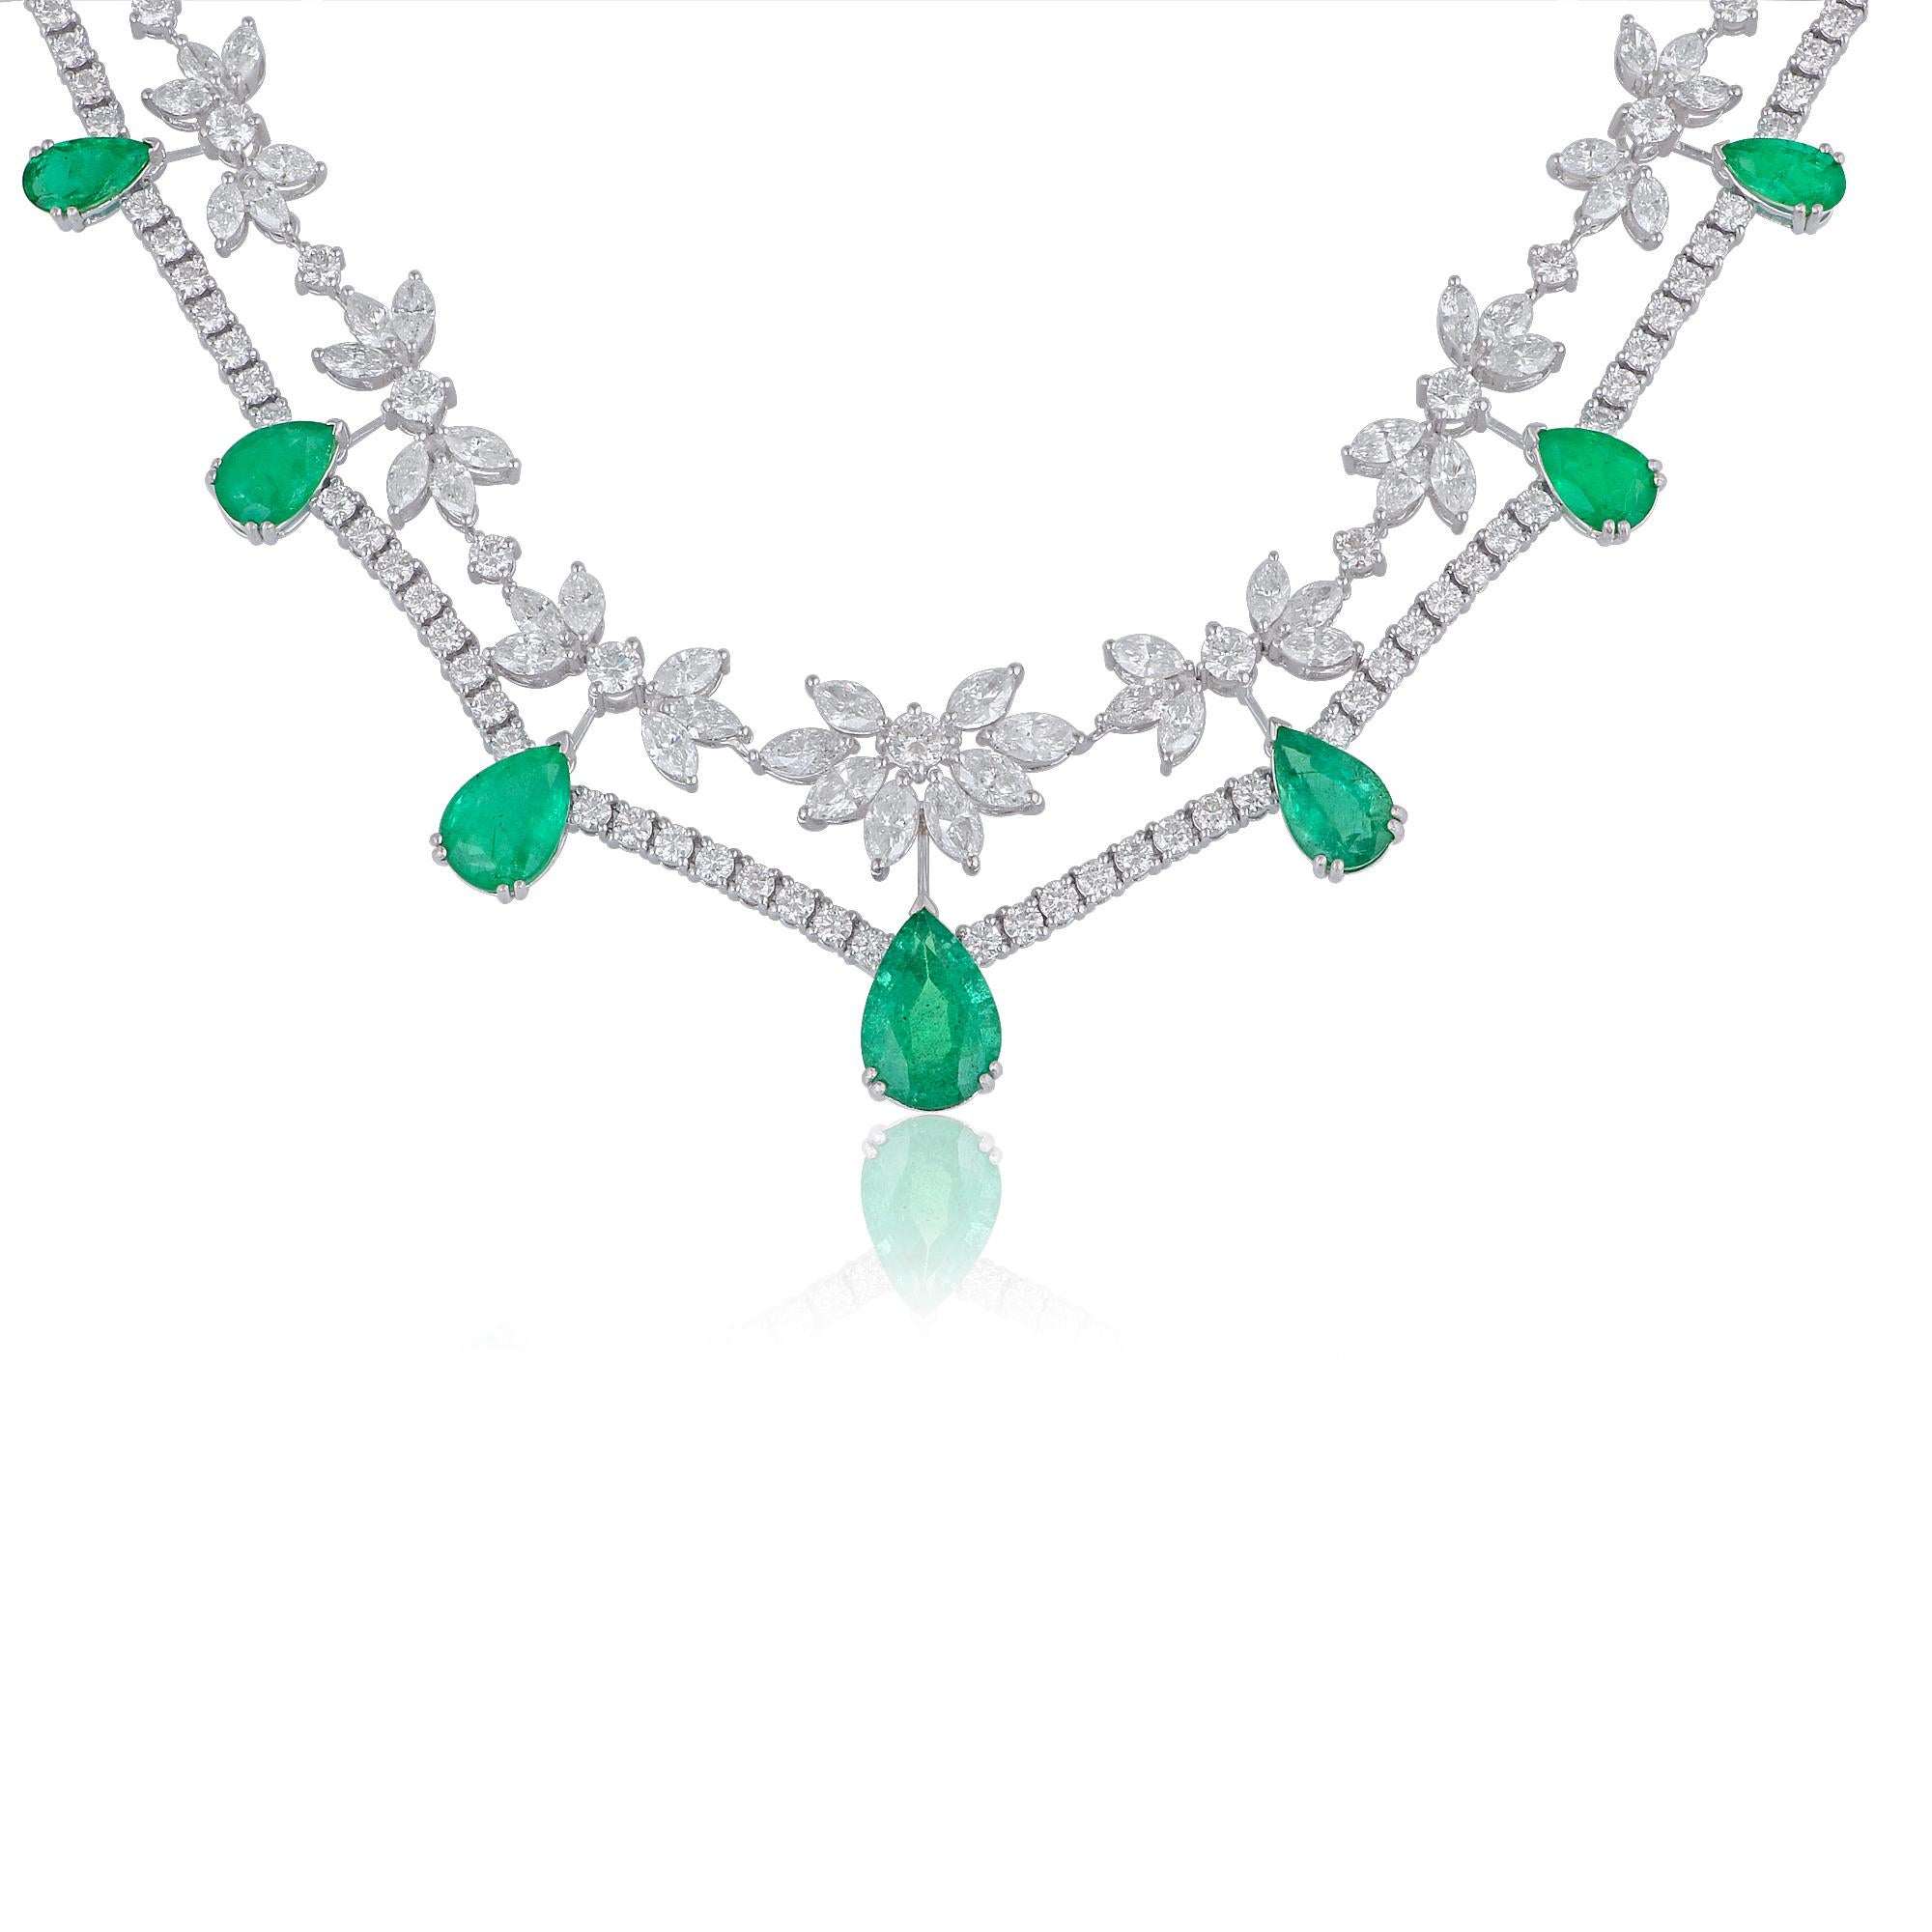 Elevate your style with this stunning necklace featuring a pear-shaped natural emerald gemstone adorned with a shimmering diamond pave. Meticulously crafted from 18 karat white gold, this jewelry piece exudes luxury, sophistication, and timeless